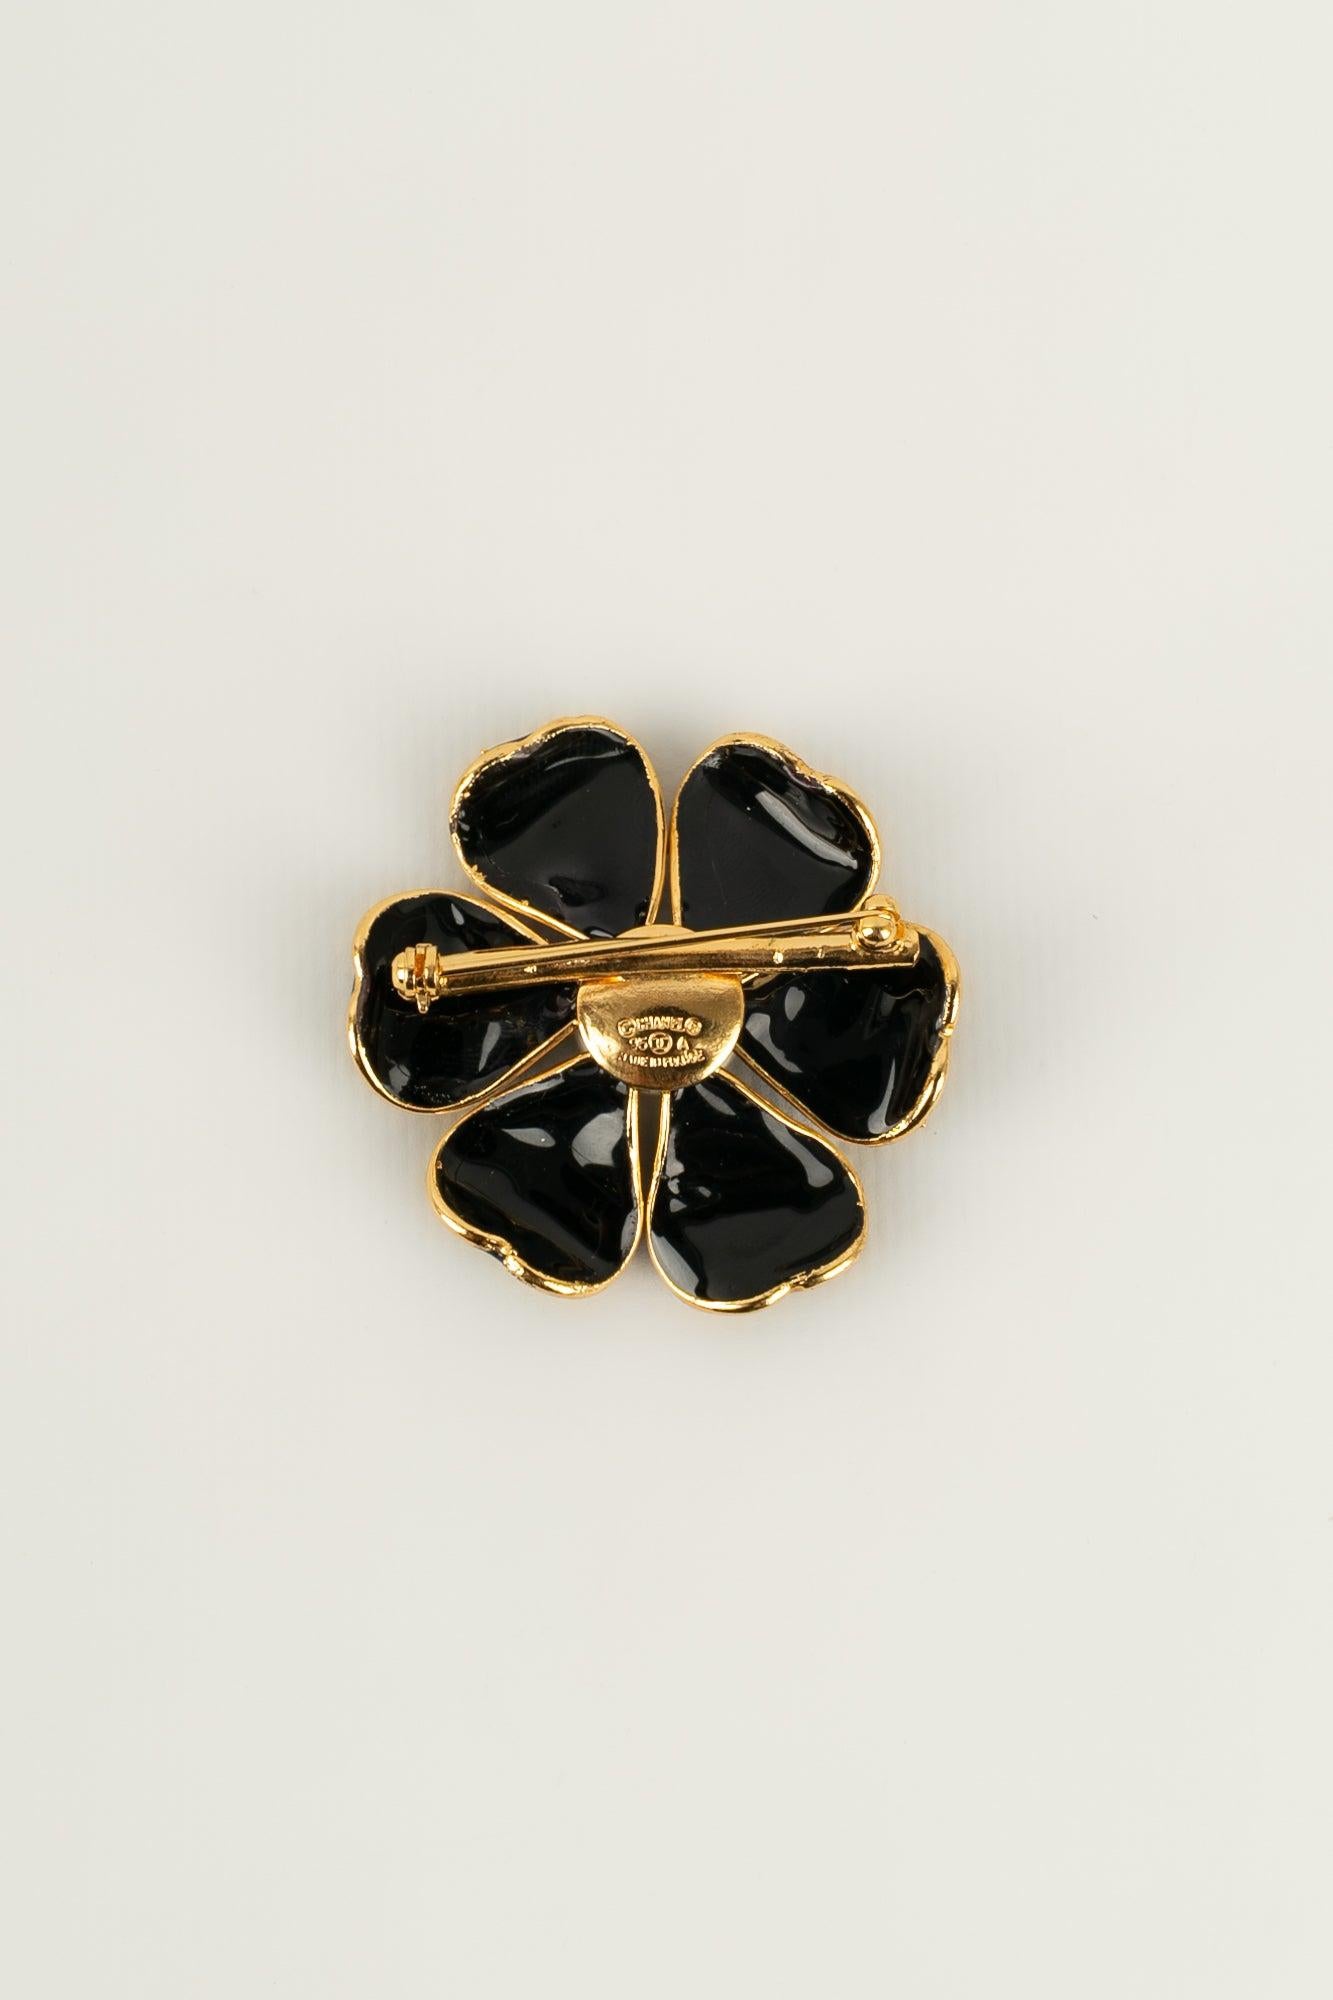 Chanel (Made in France) Camellia brooch in gold-plated metal, black glass paste, and pearly cabochon. Fall/Winter 1995 Collection. Work from the Gripoix Atelier for the house of Chanel.

Additional Information:
Condition: Very good